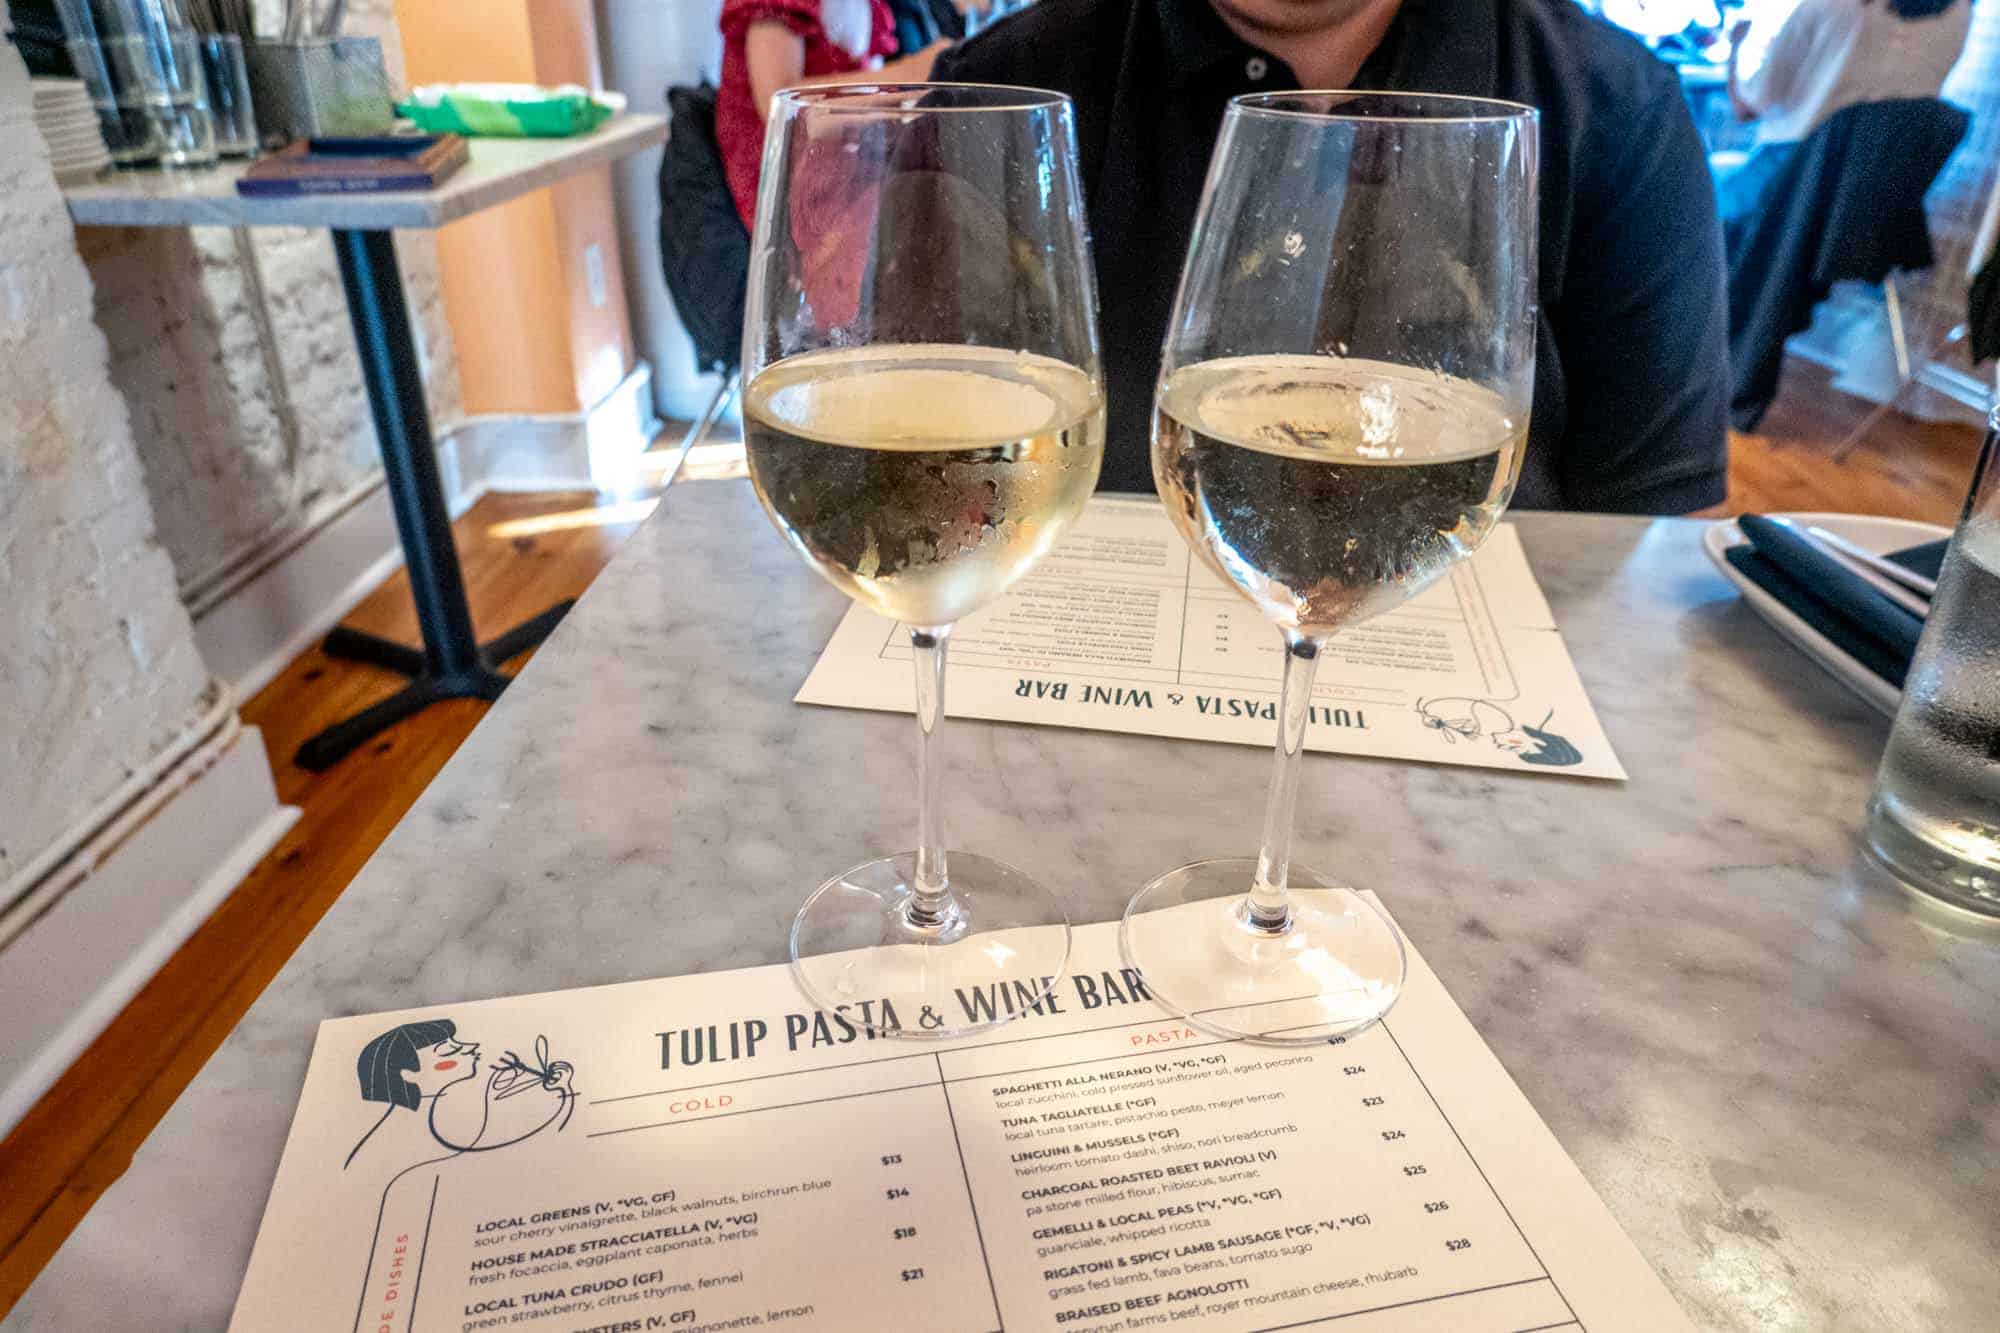 Two glasses of white wine on a table with a menu saying "Tulip Pasta & Wine Bar"